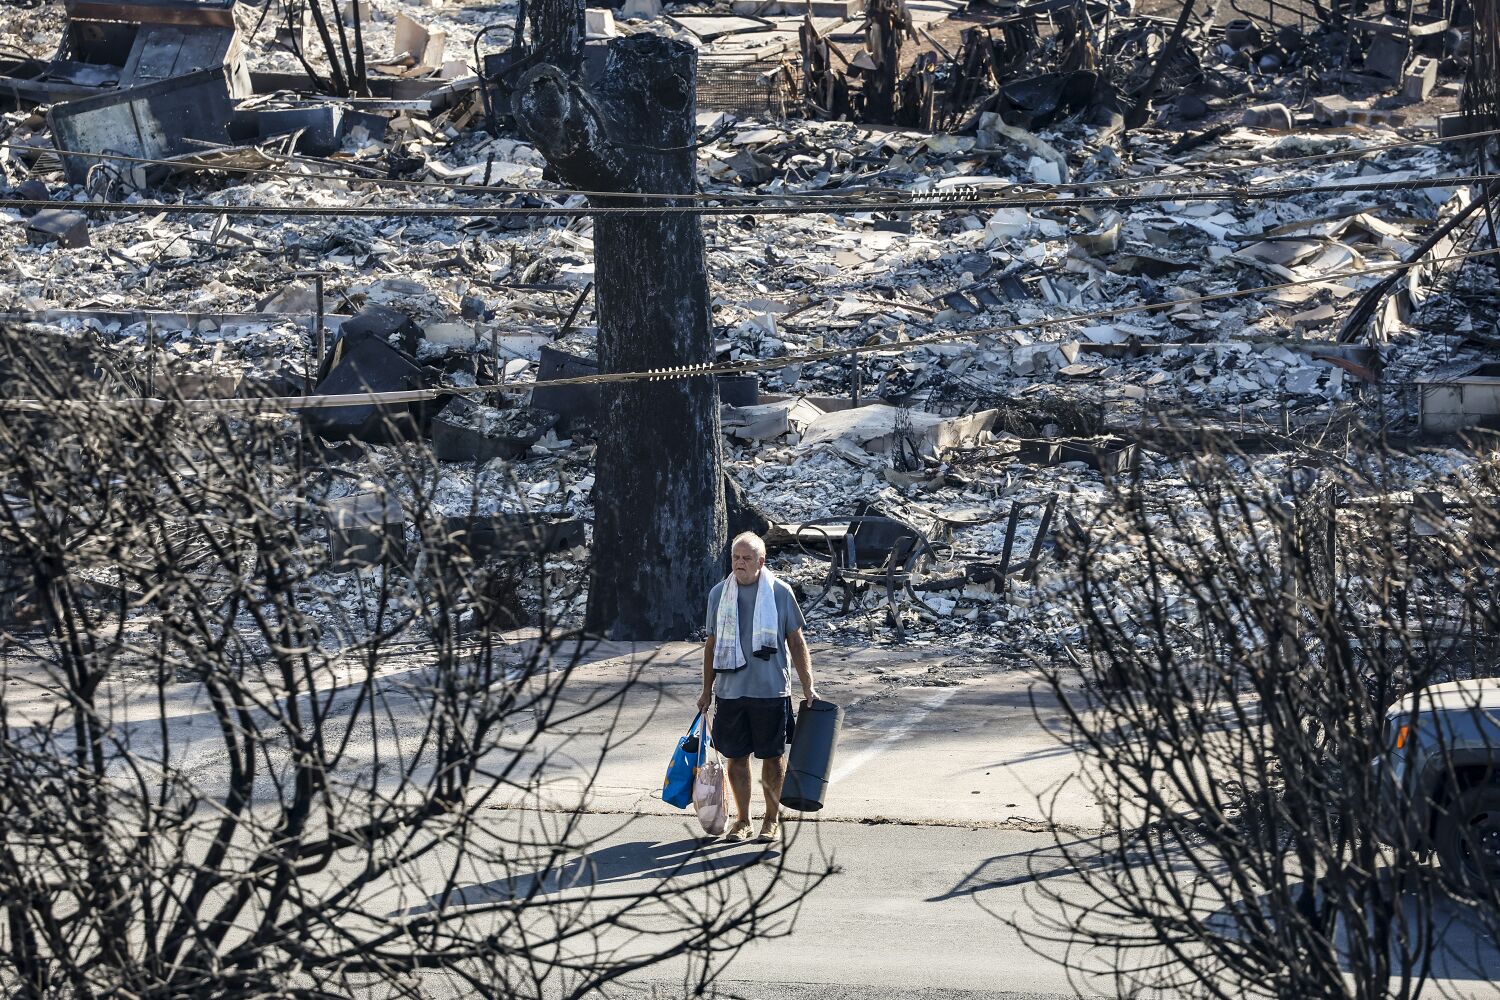 Reeling from the deadliest wildfire in a century, Maui sees ghosts from California's past